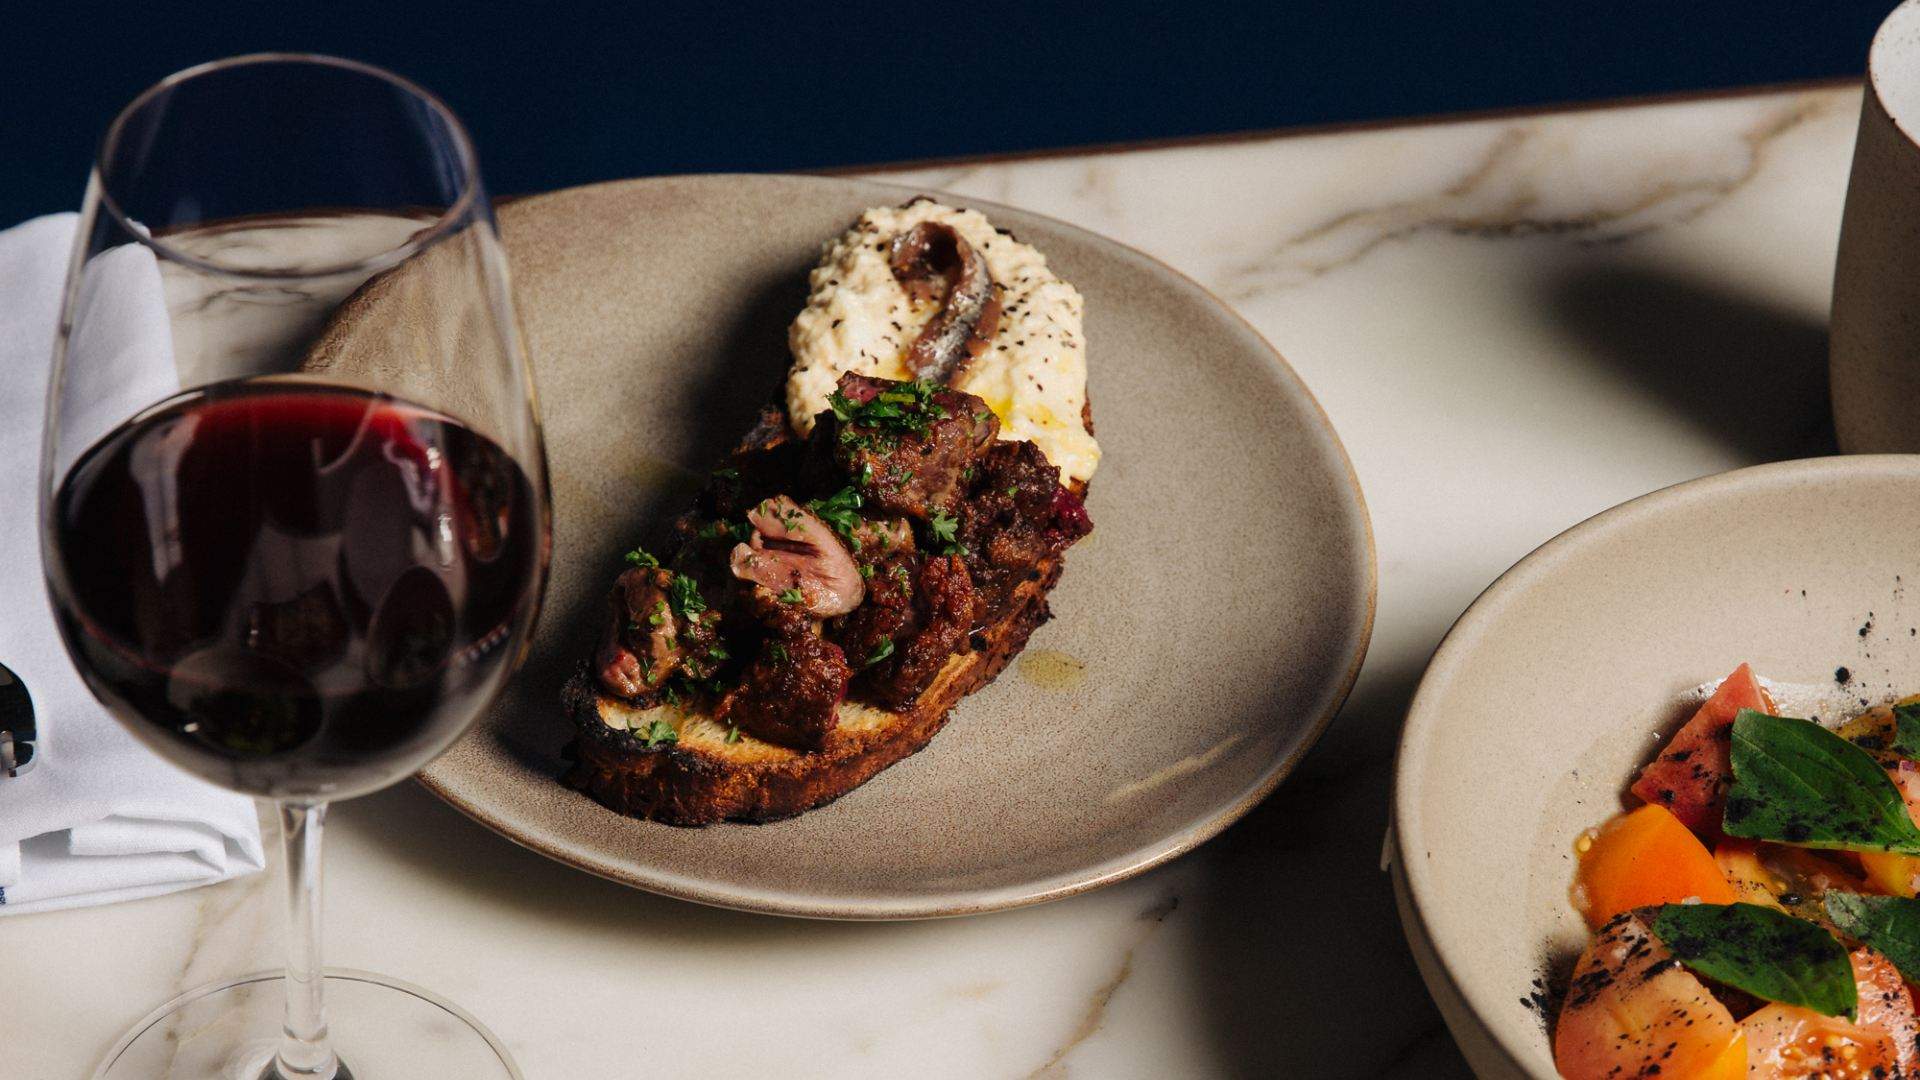 Crofter Dining Room & Bar Is Lygon Street's New Home of British-Style Meals and Bar Snacks